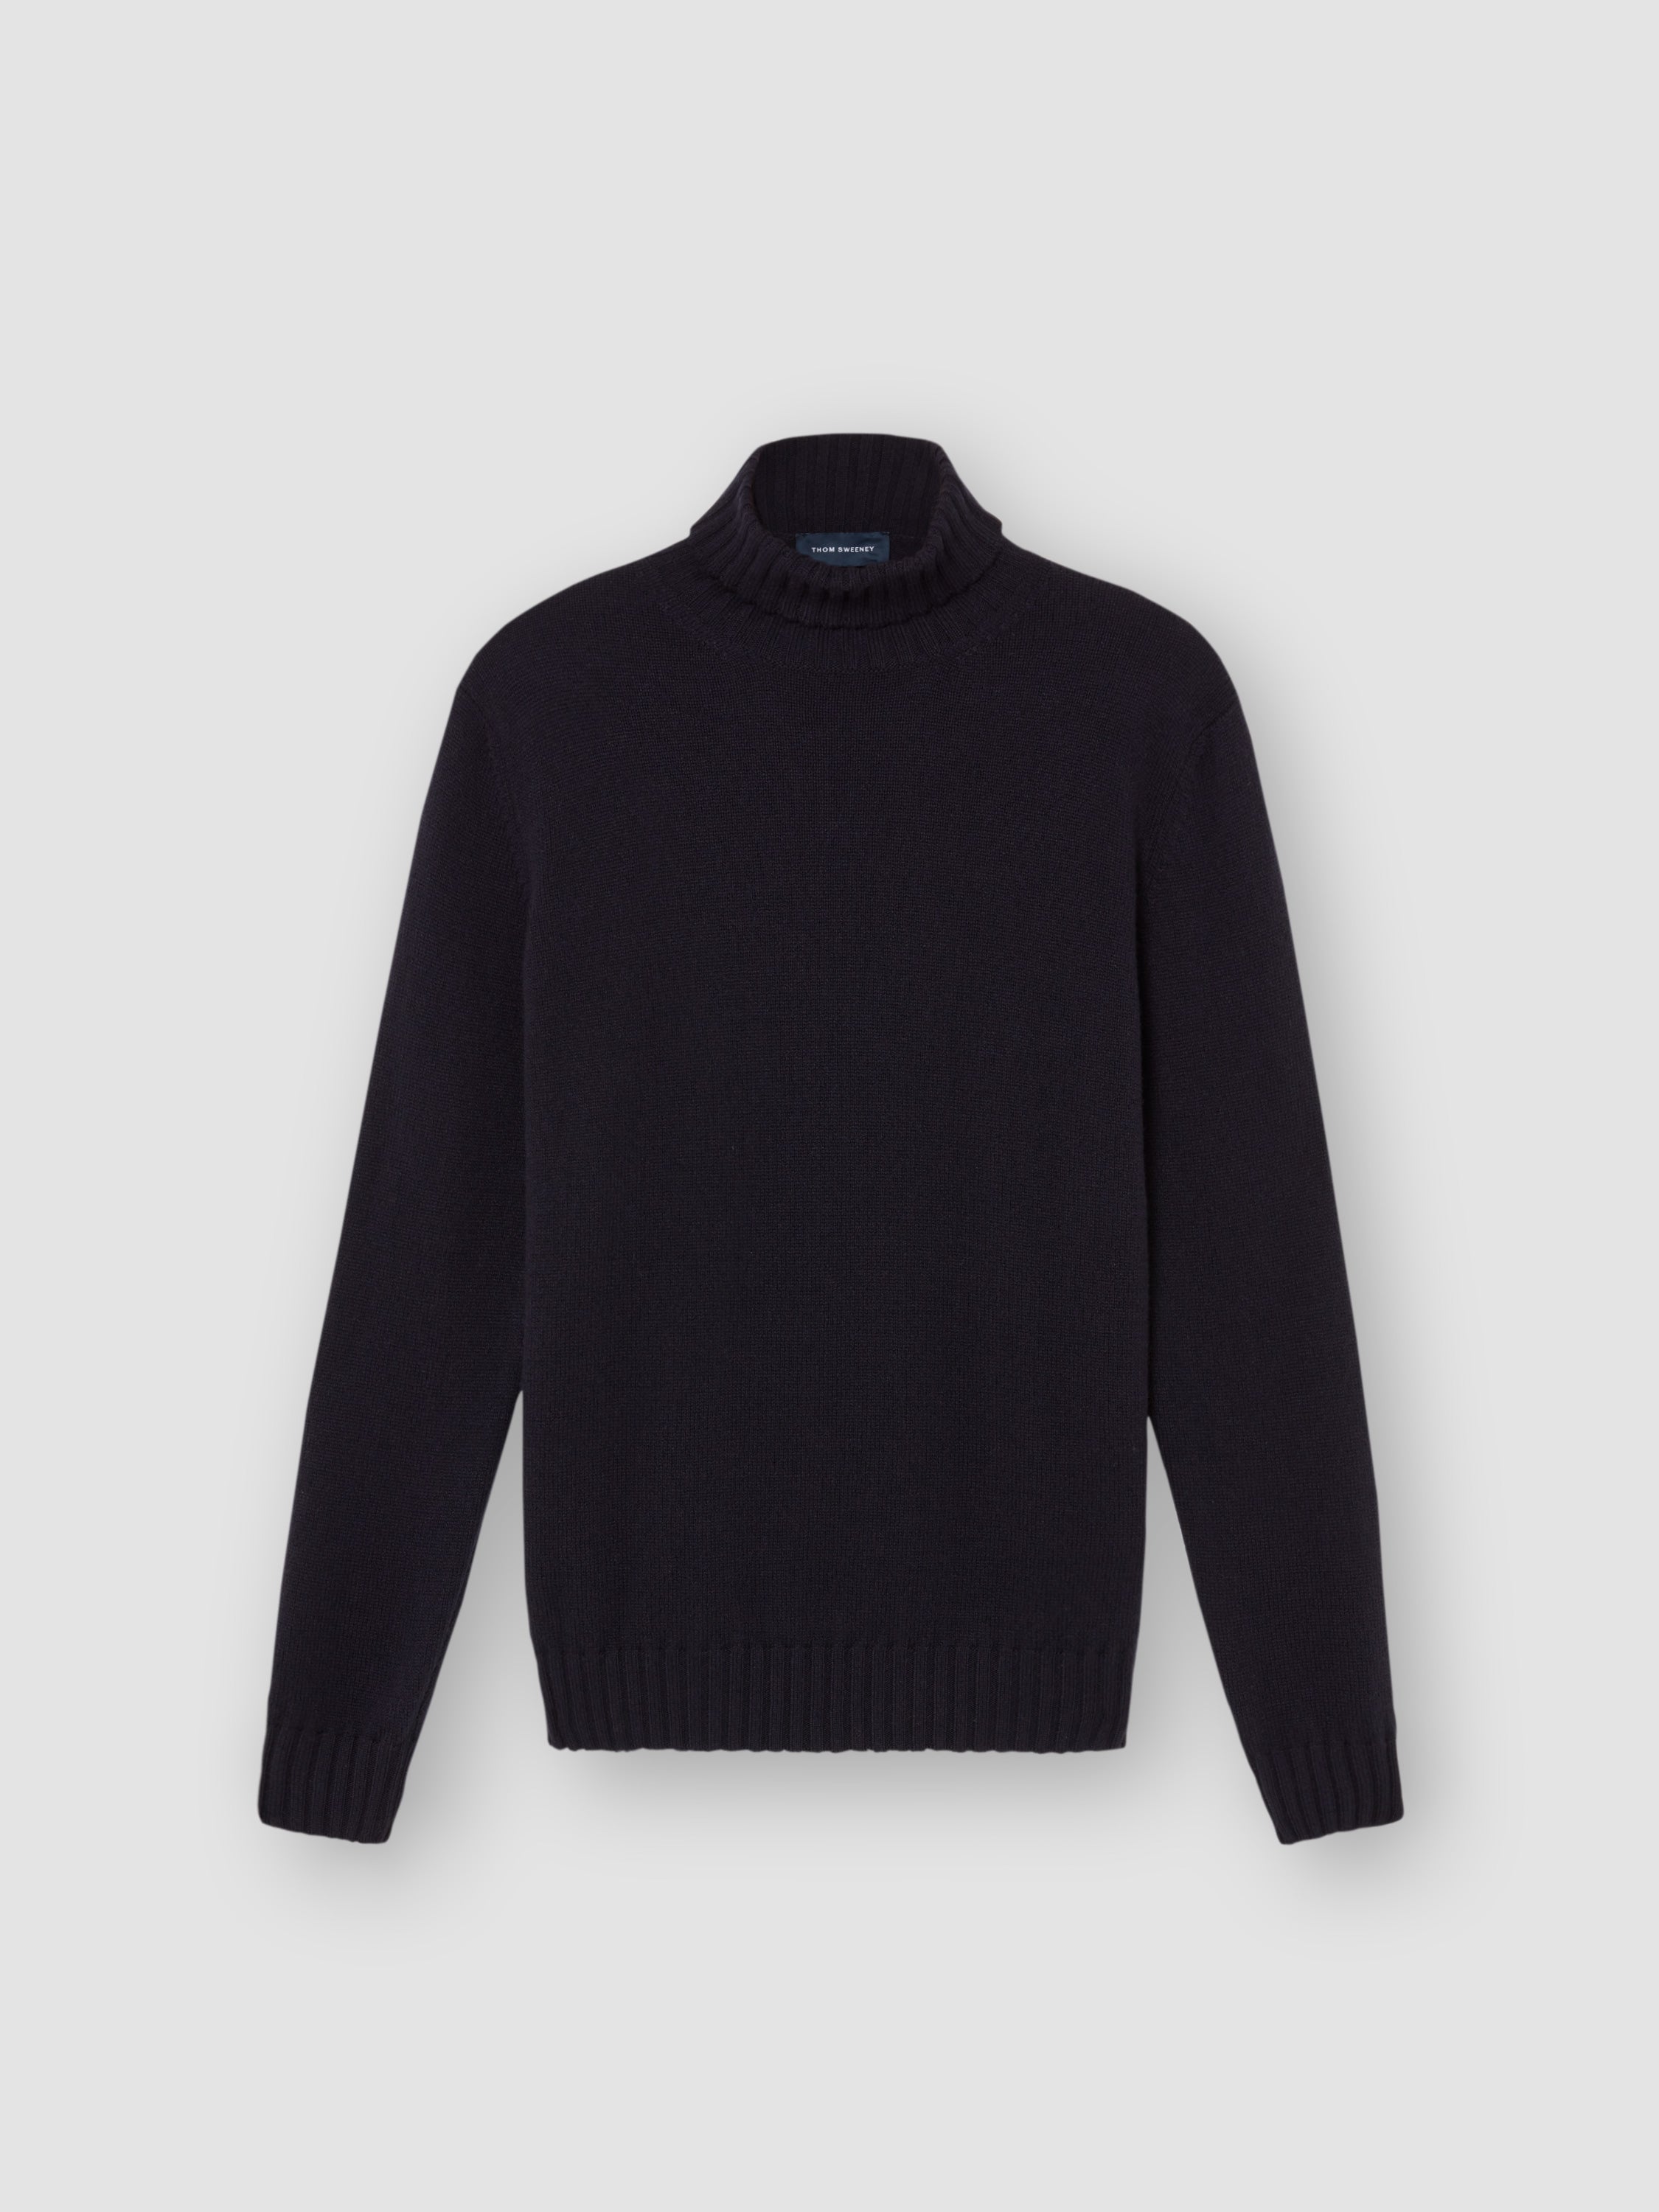 Cashmere Roll Neck Sweater Navy Product Image